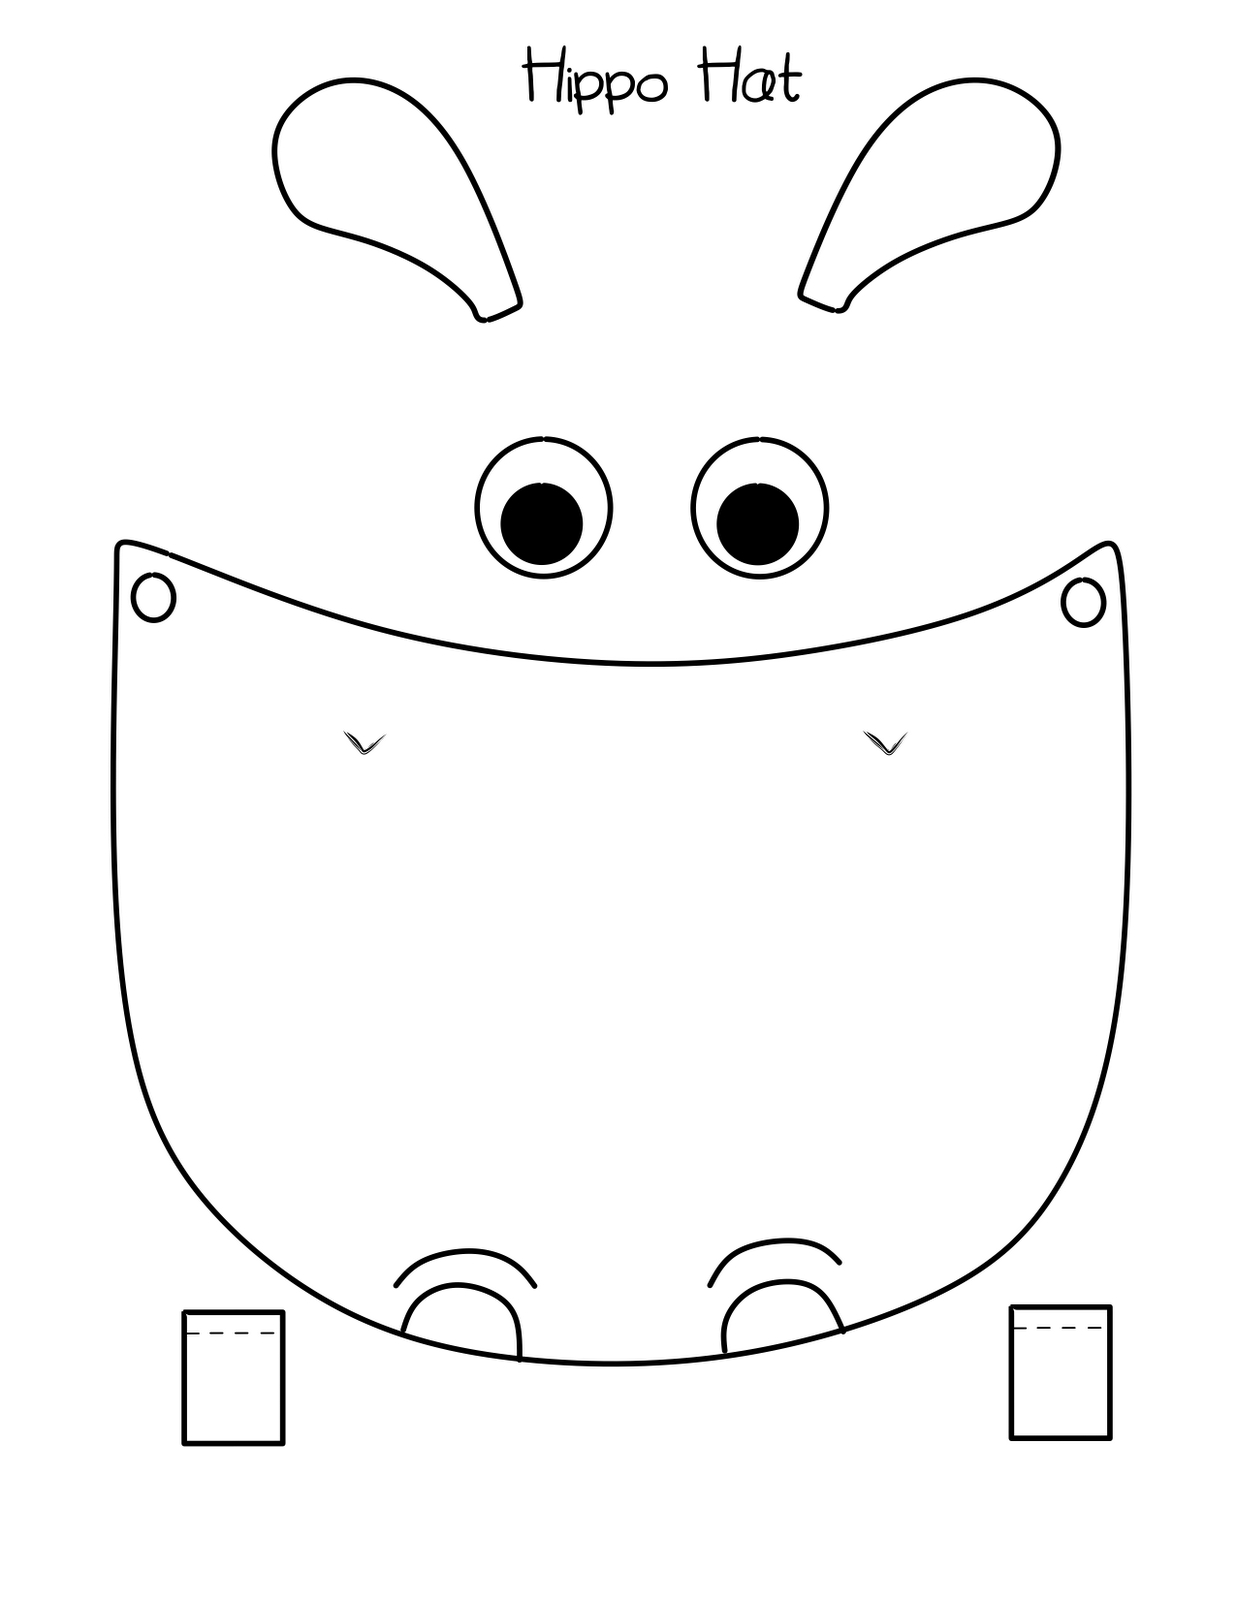 Bust Out Your Crayons: Hippo Hat Free Printable | Hippo Party Ideas - Free Printable Hippo Mask